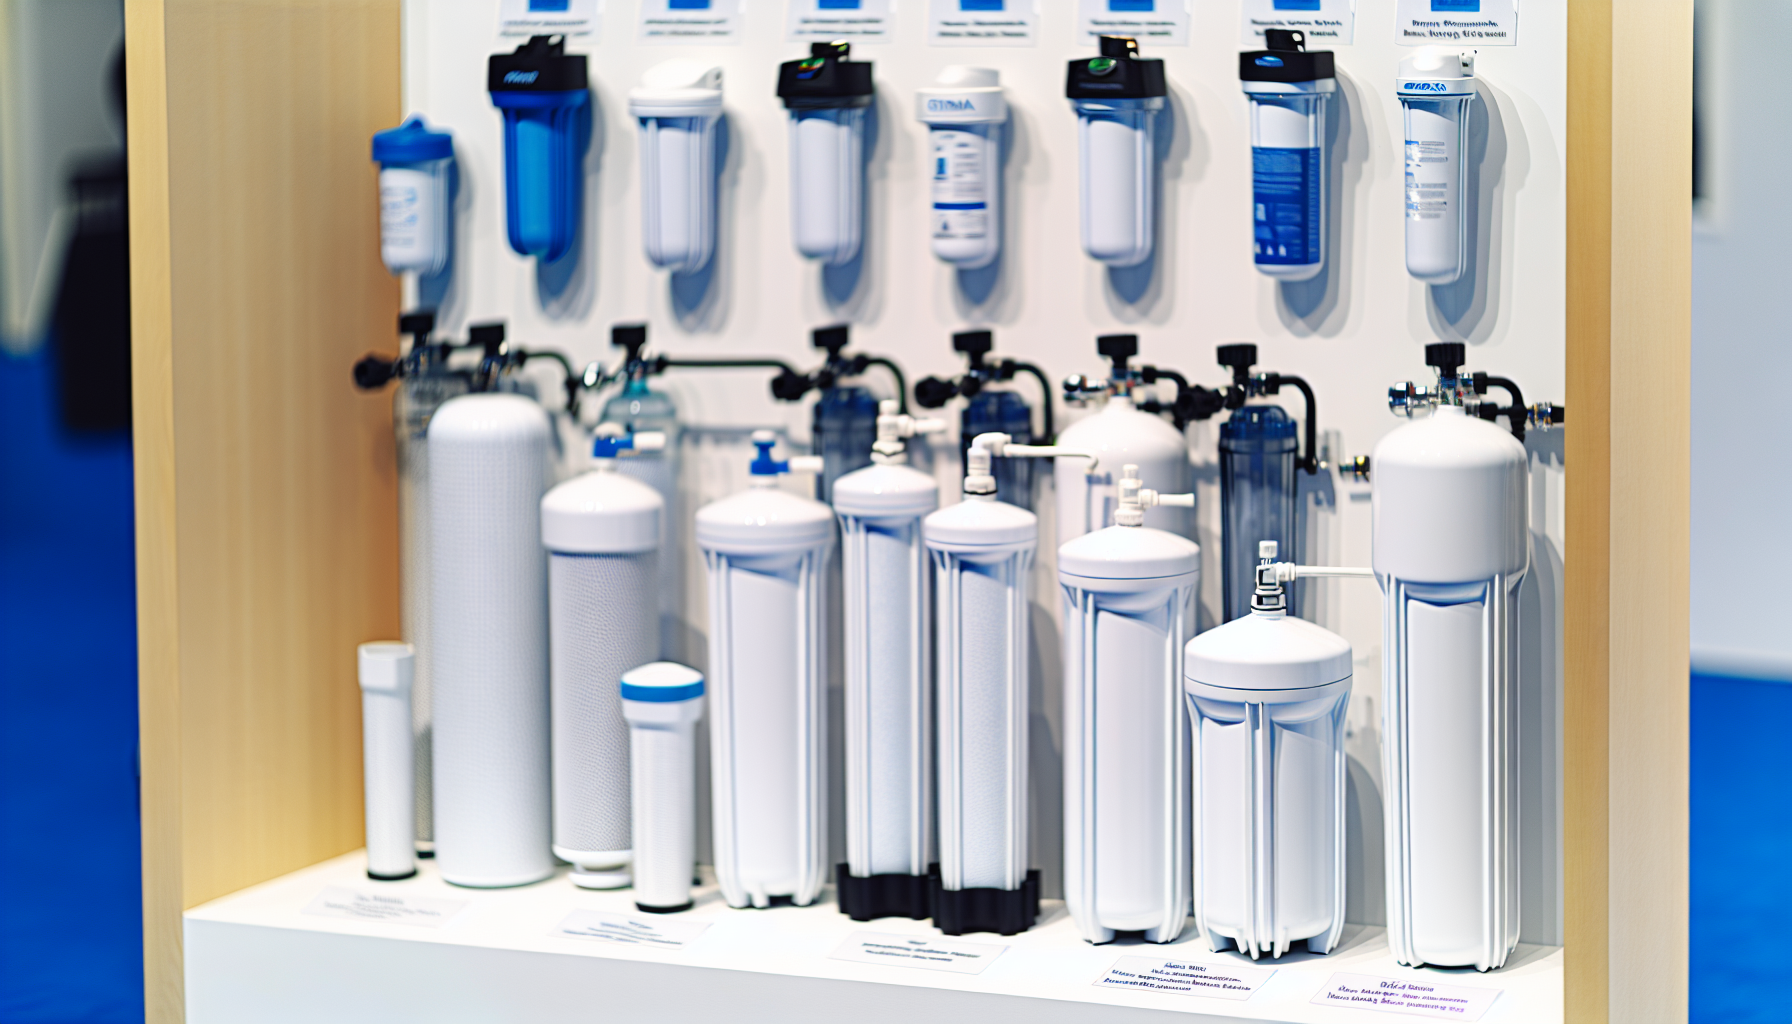 Selecting the ideal whole house water filtration system